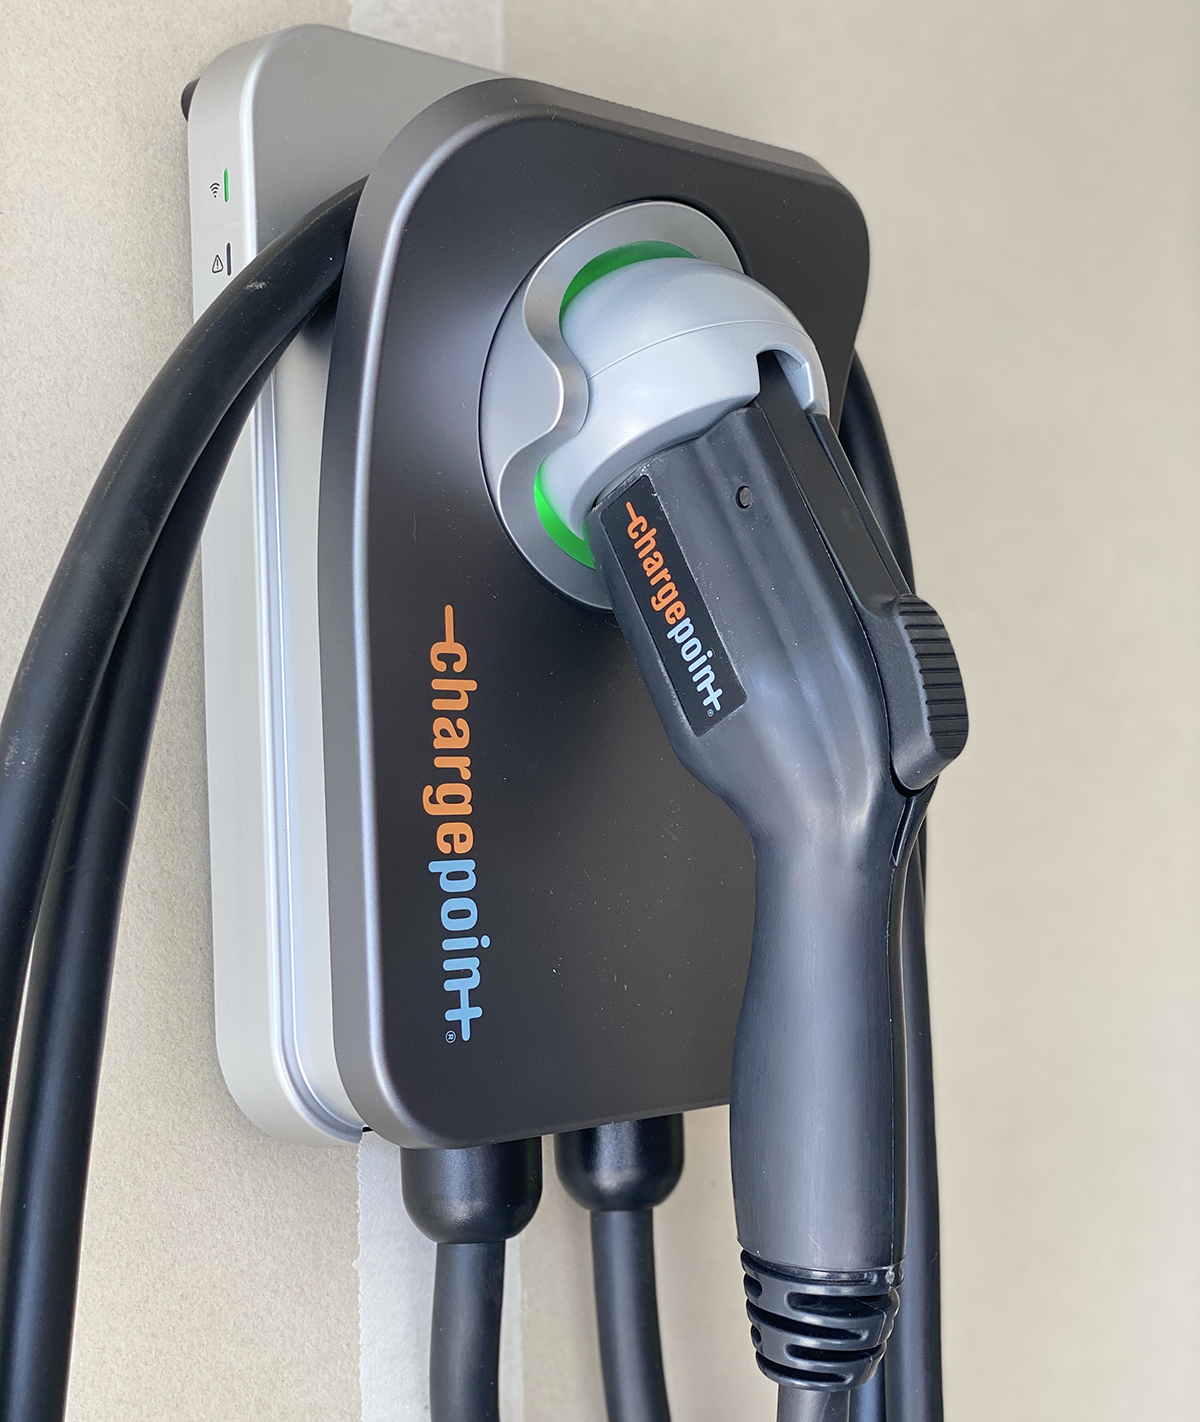 Colorado Coop Launches EV Charging Pilot Program for Residential